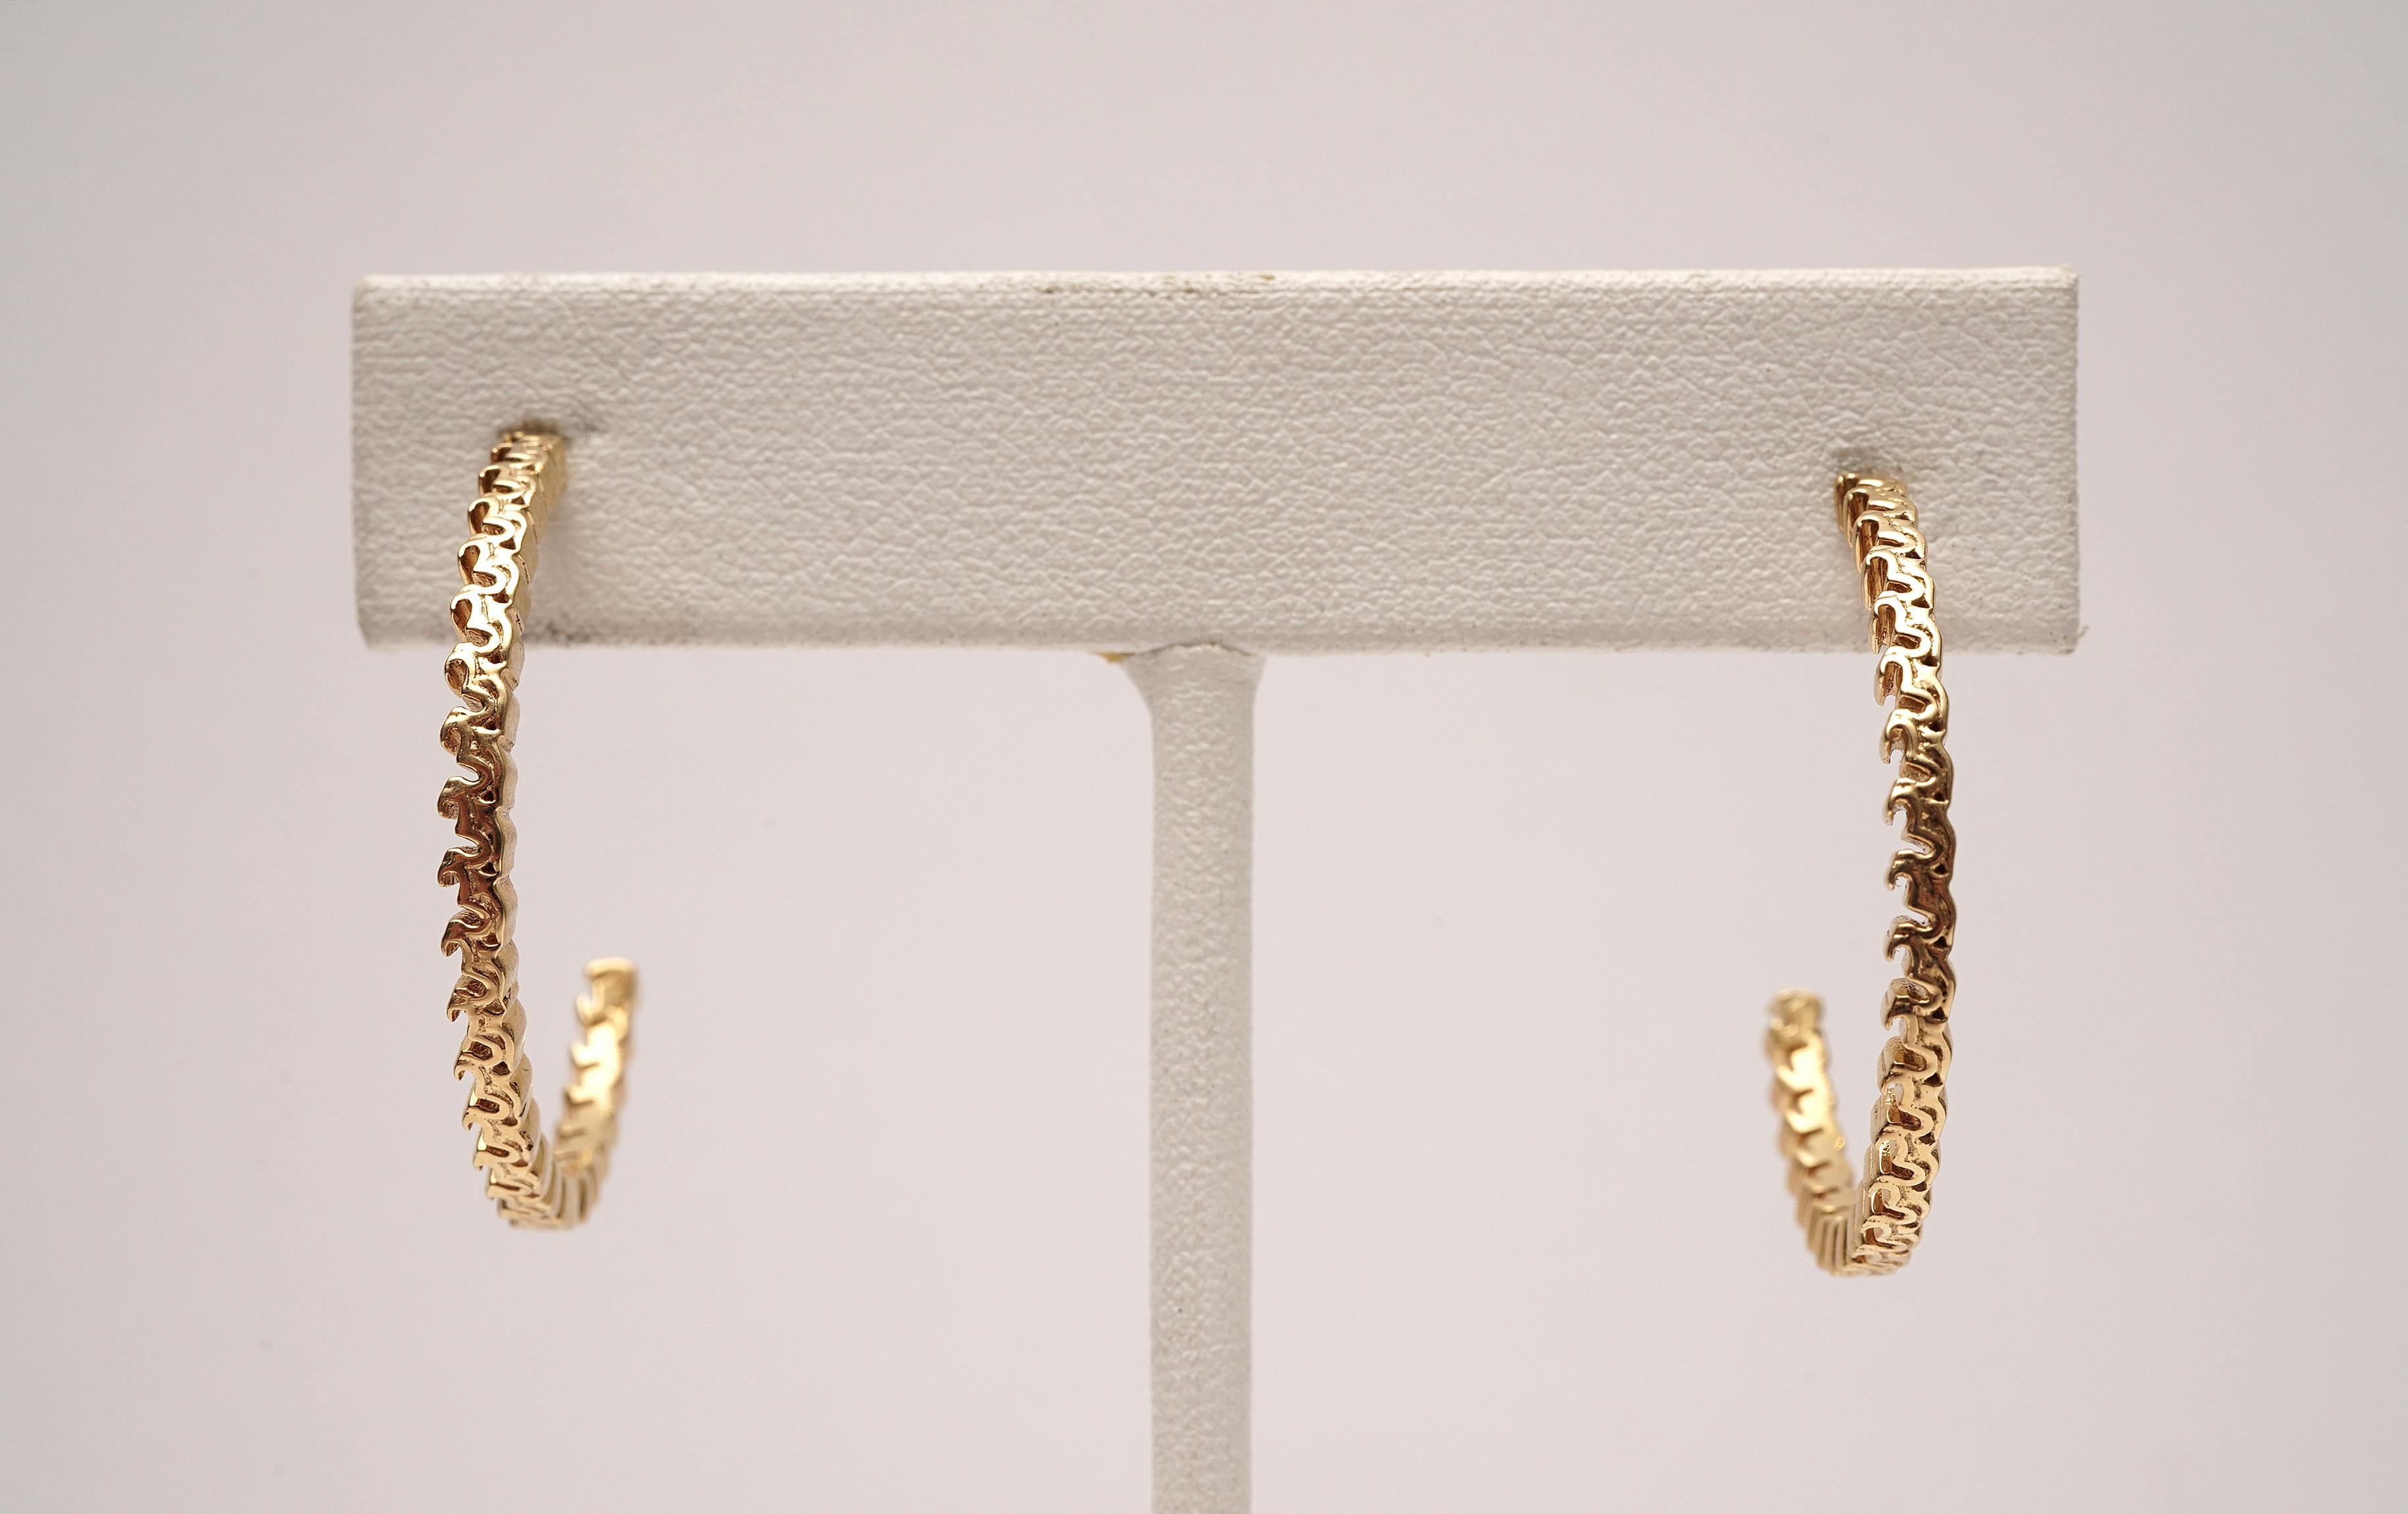 Pair of 18 Karat Gold Textured Hoops In Excellent Condition For Sale In Nantucket, MA